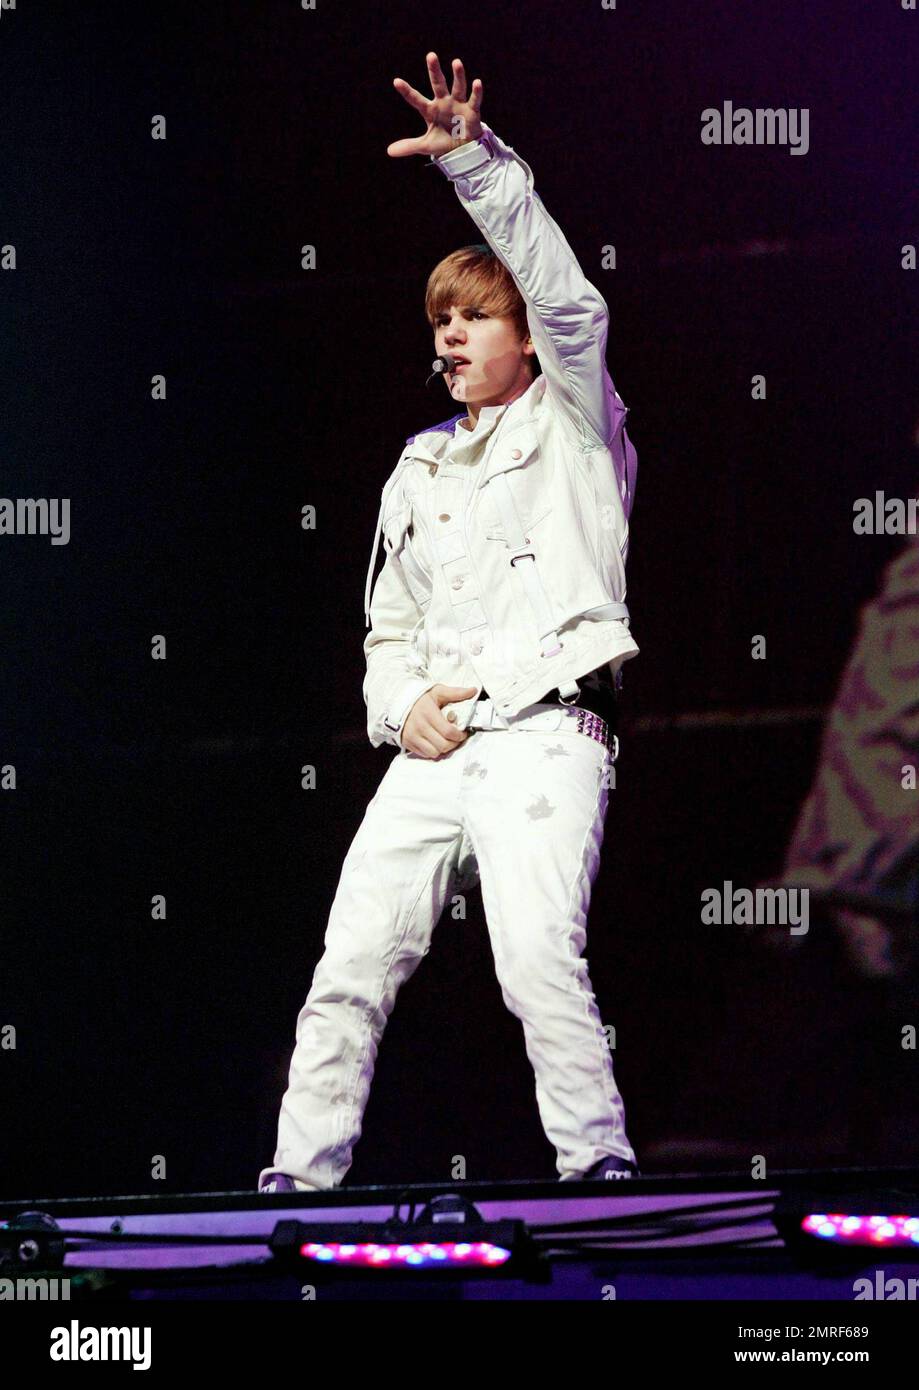 In a white buckle-detailed jacket, trendy paint splattered white jeans and  his trademark purple high top sneakers teen heartthrob Justin Bieber  performs live in concert at the American Airlines Arena. Bieber threw